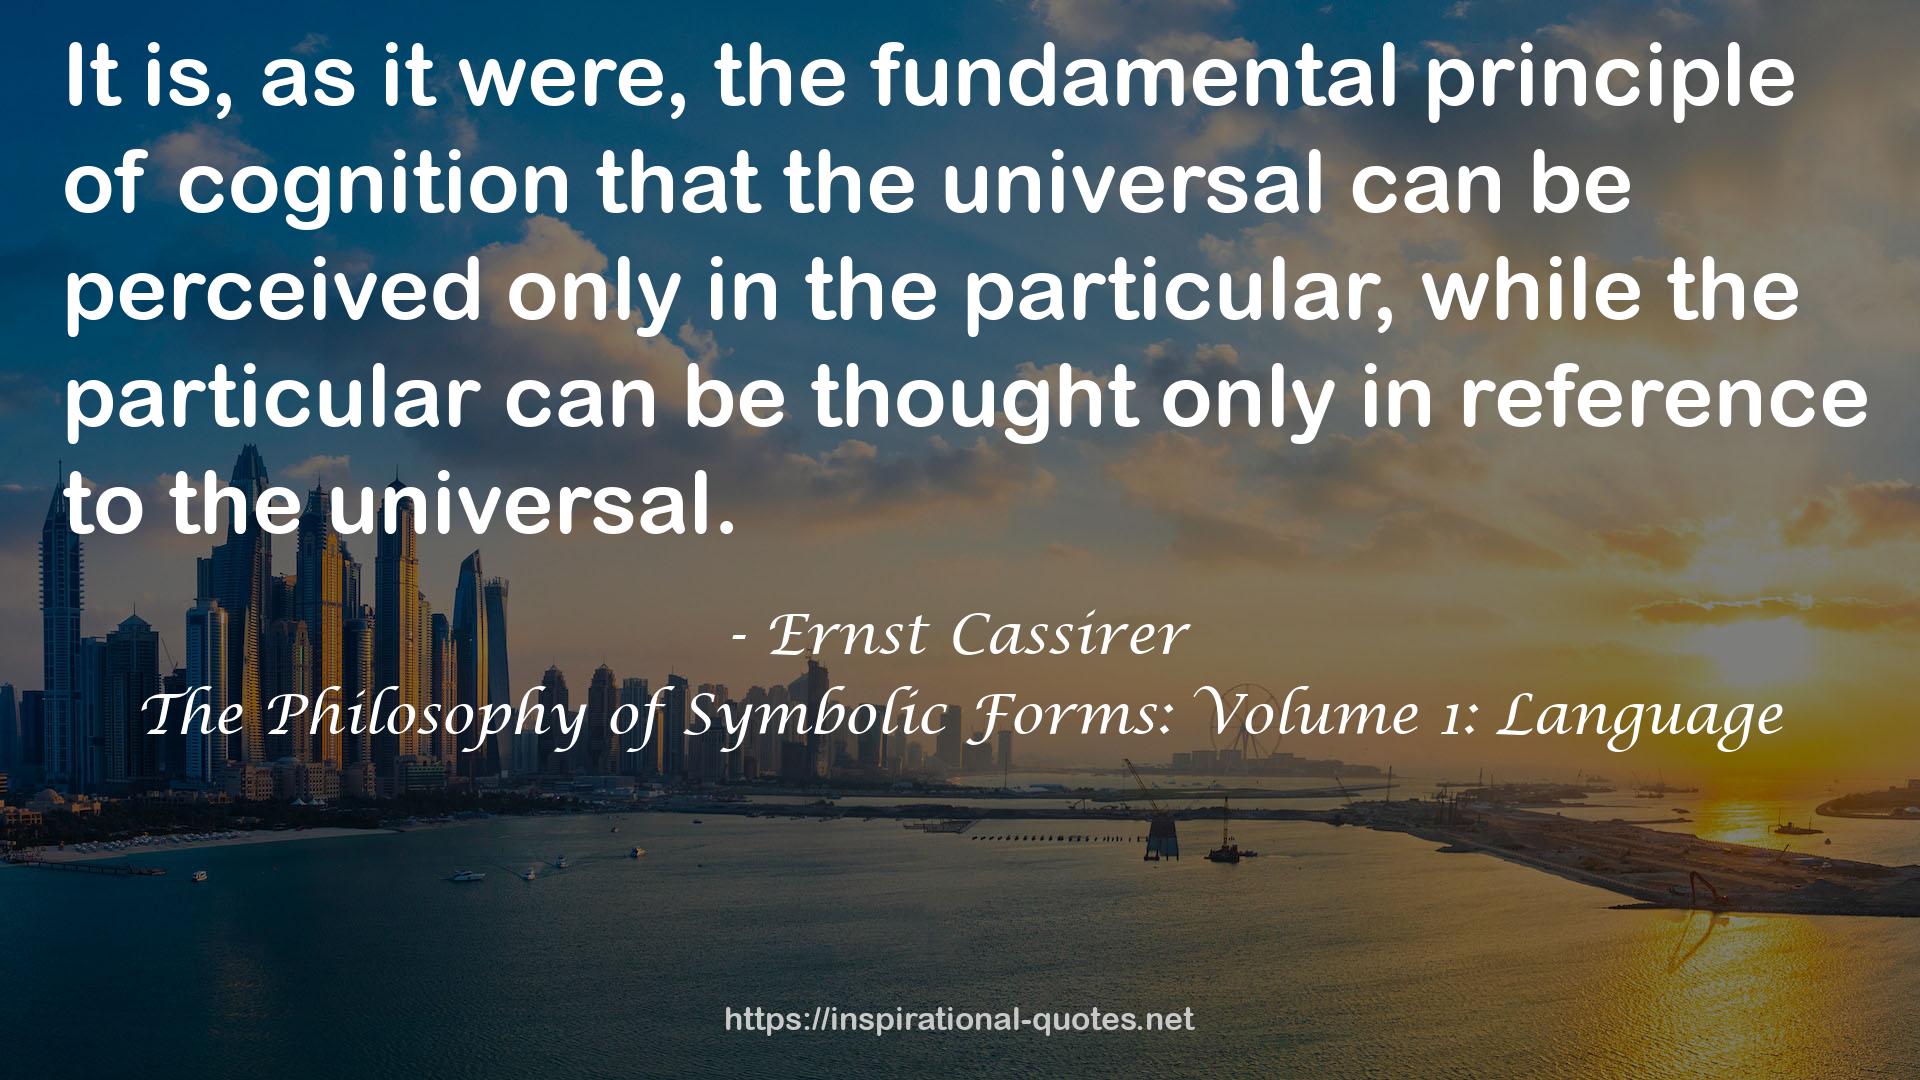 The Philosophy of Symbolic Forms: Volume 1: Language QUOTES